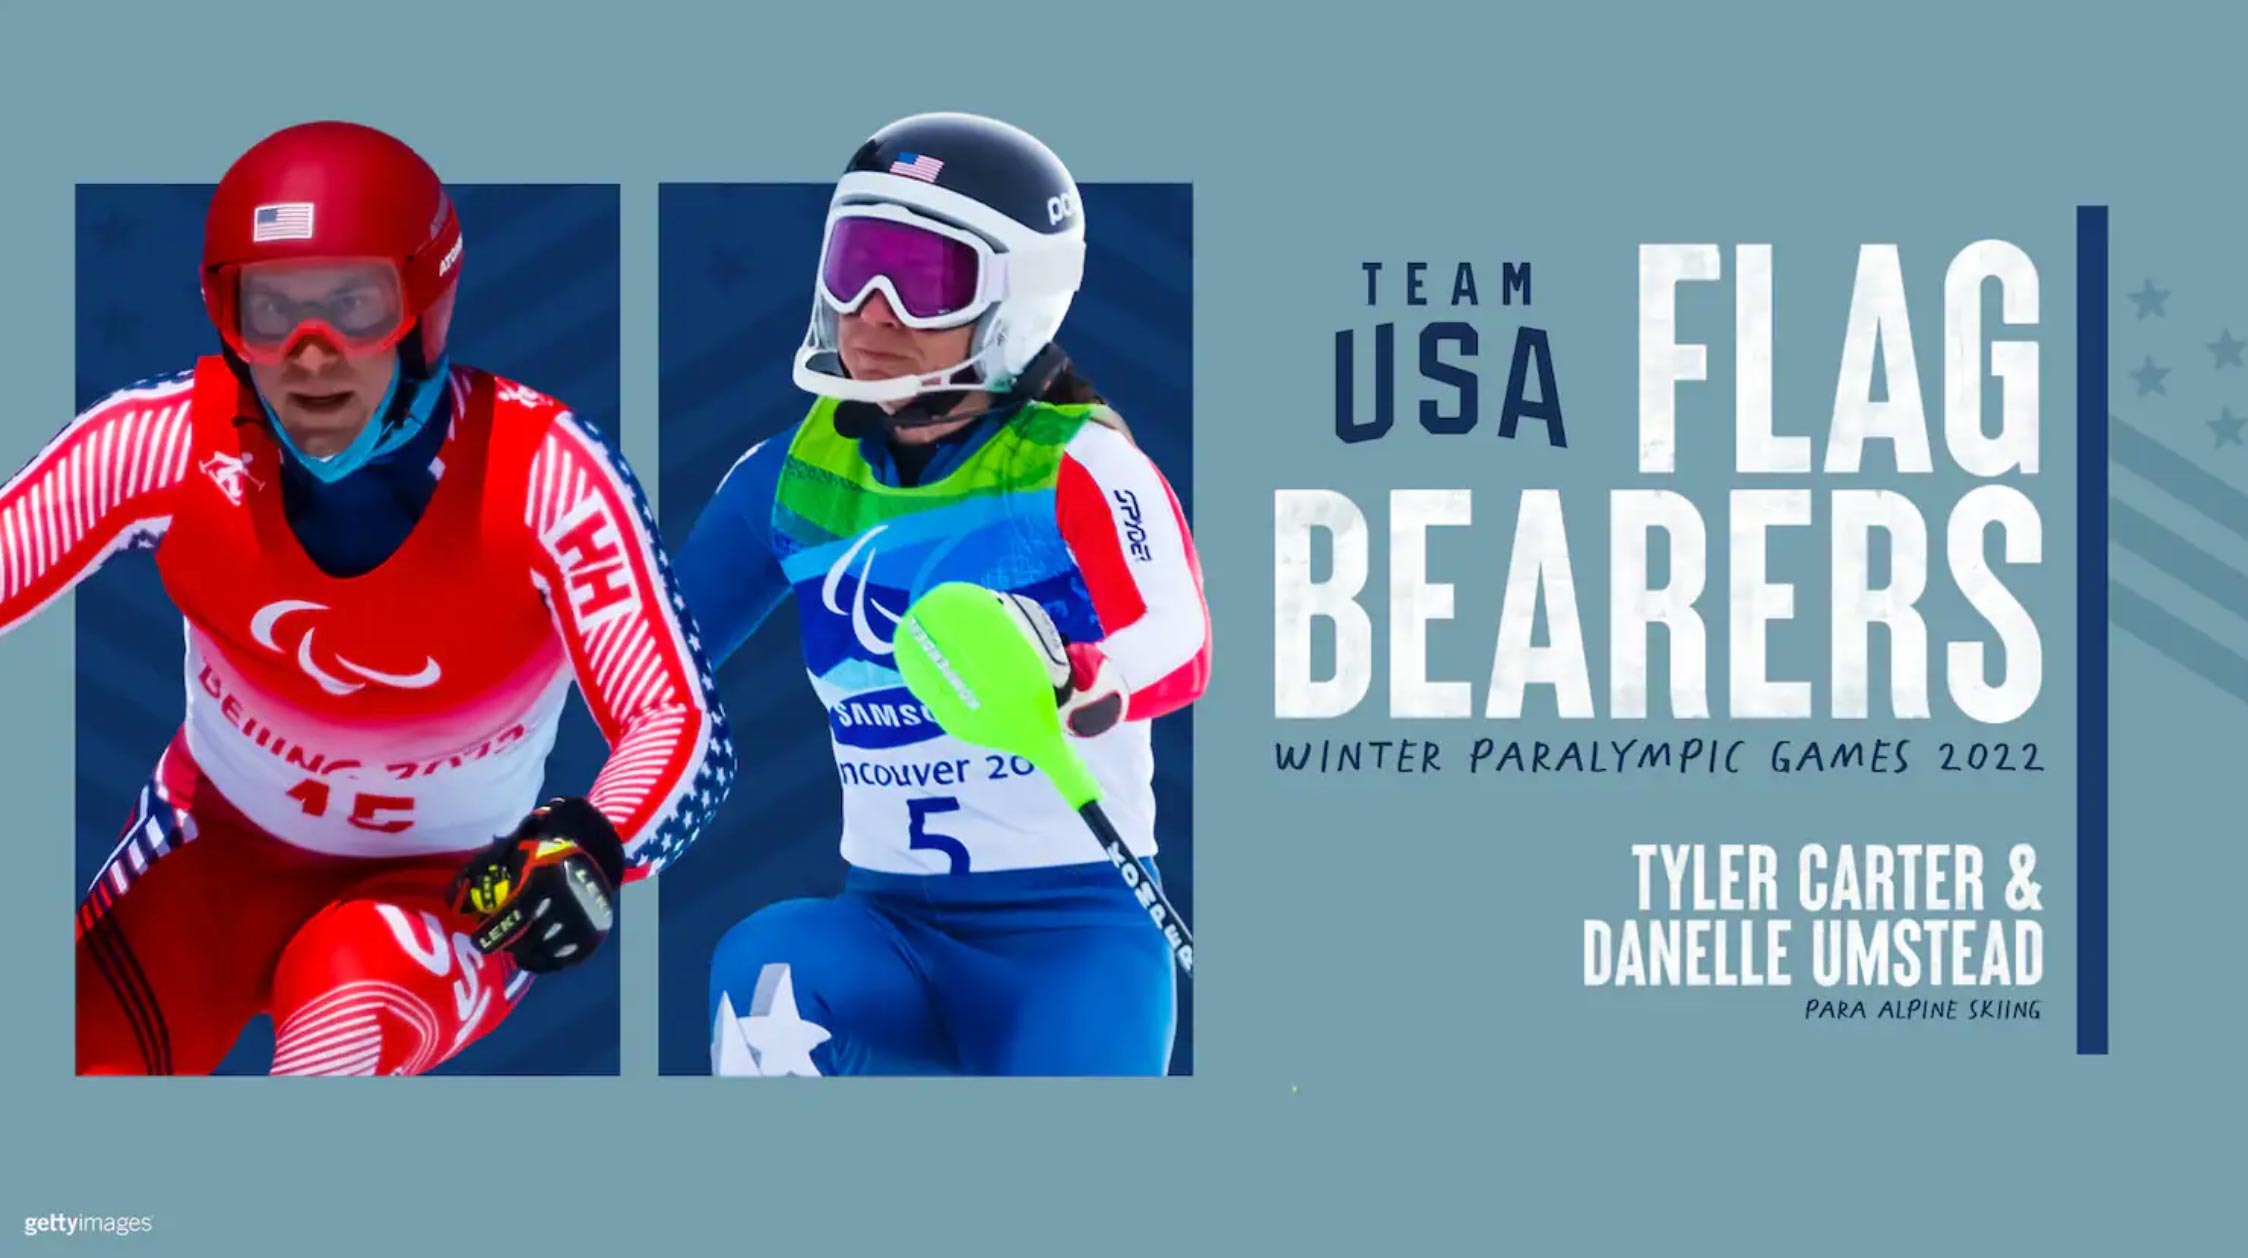 Danelle Umstead Voted as Team USA’s Flag Bearer at the 2022 Winter Paralympic Games